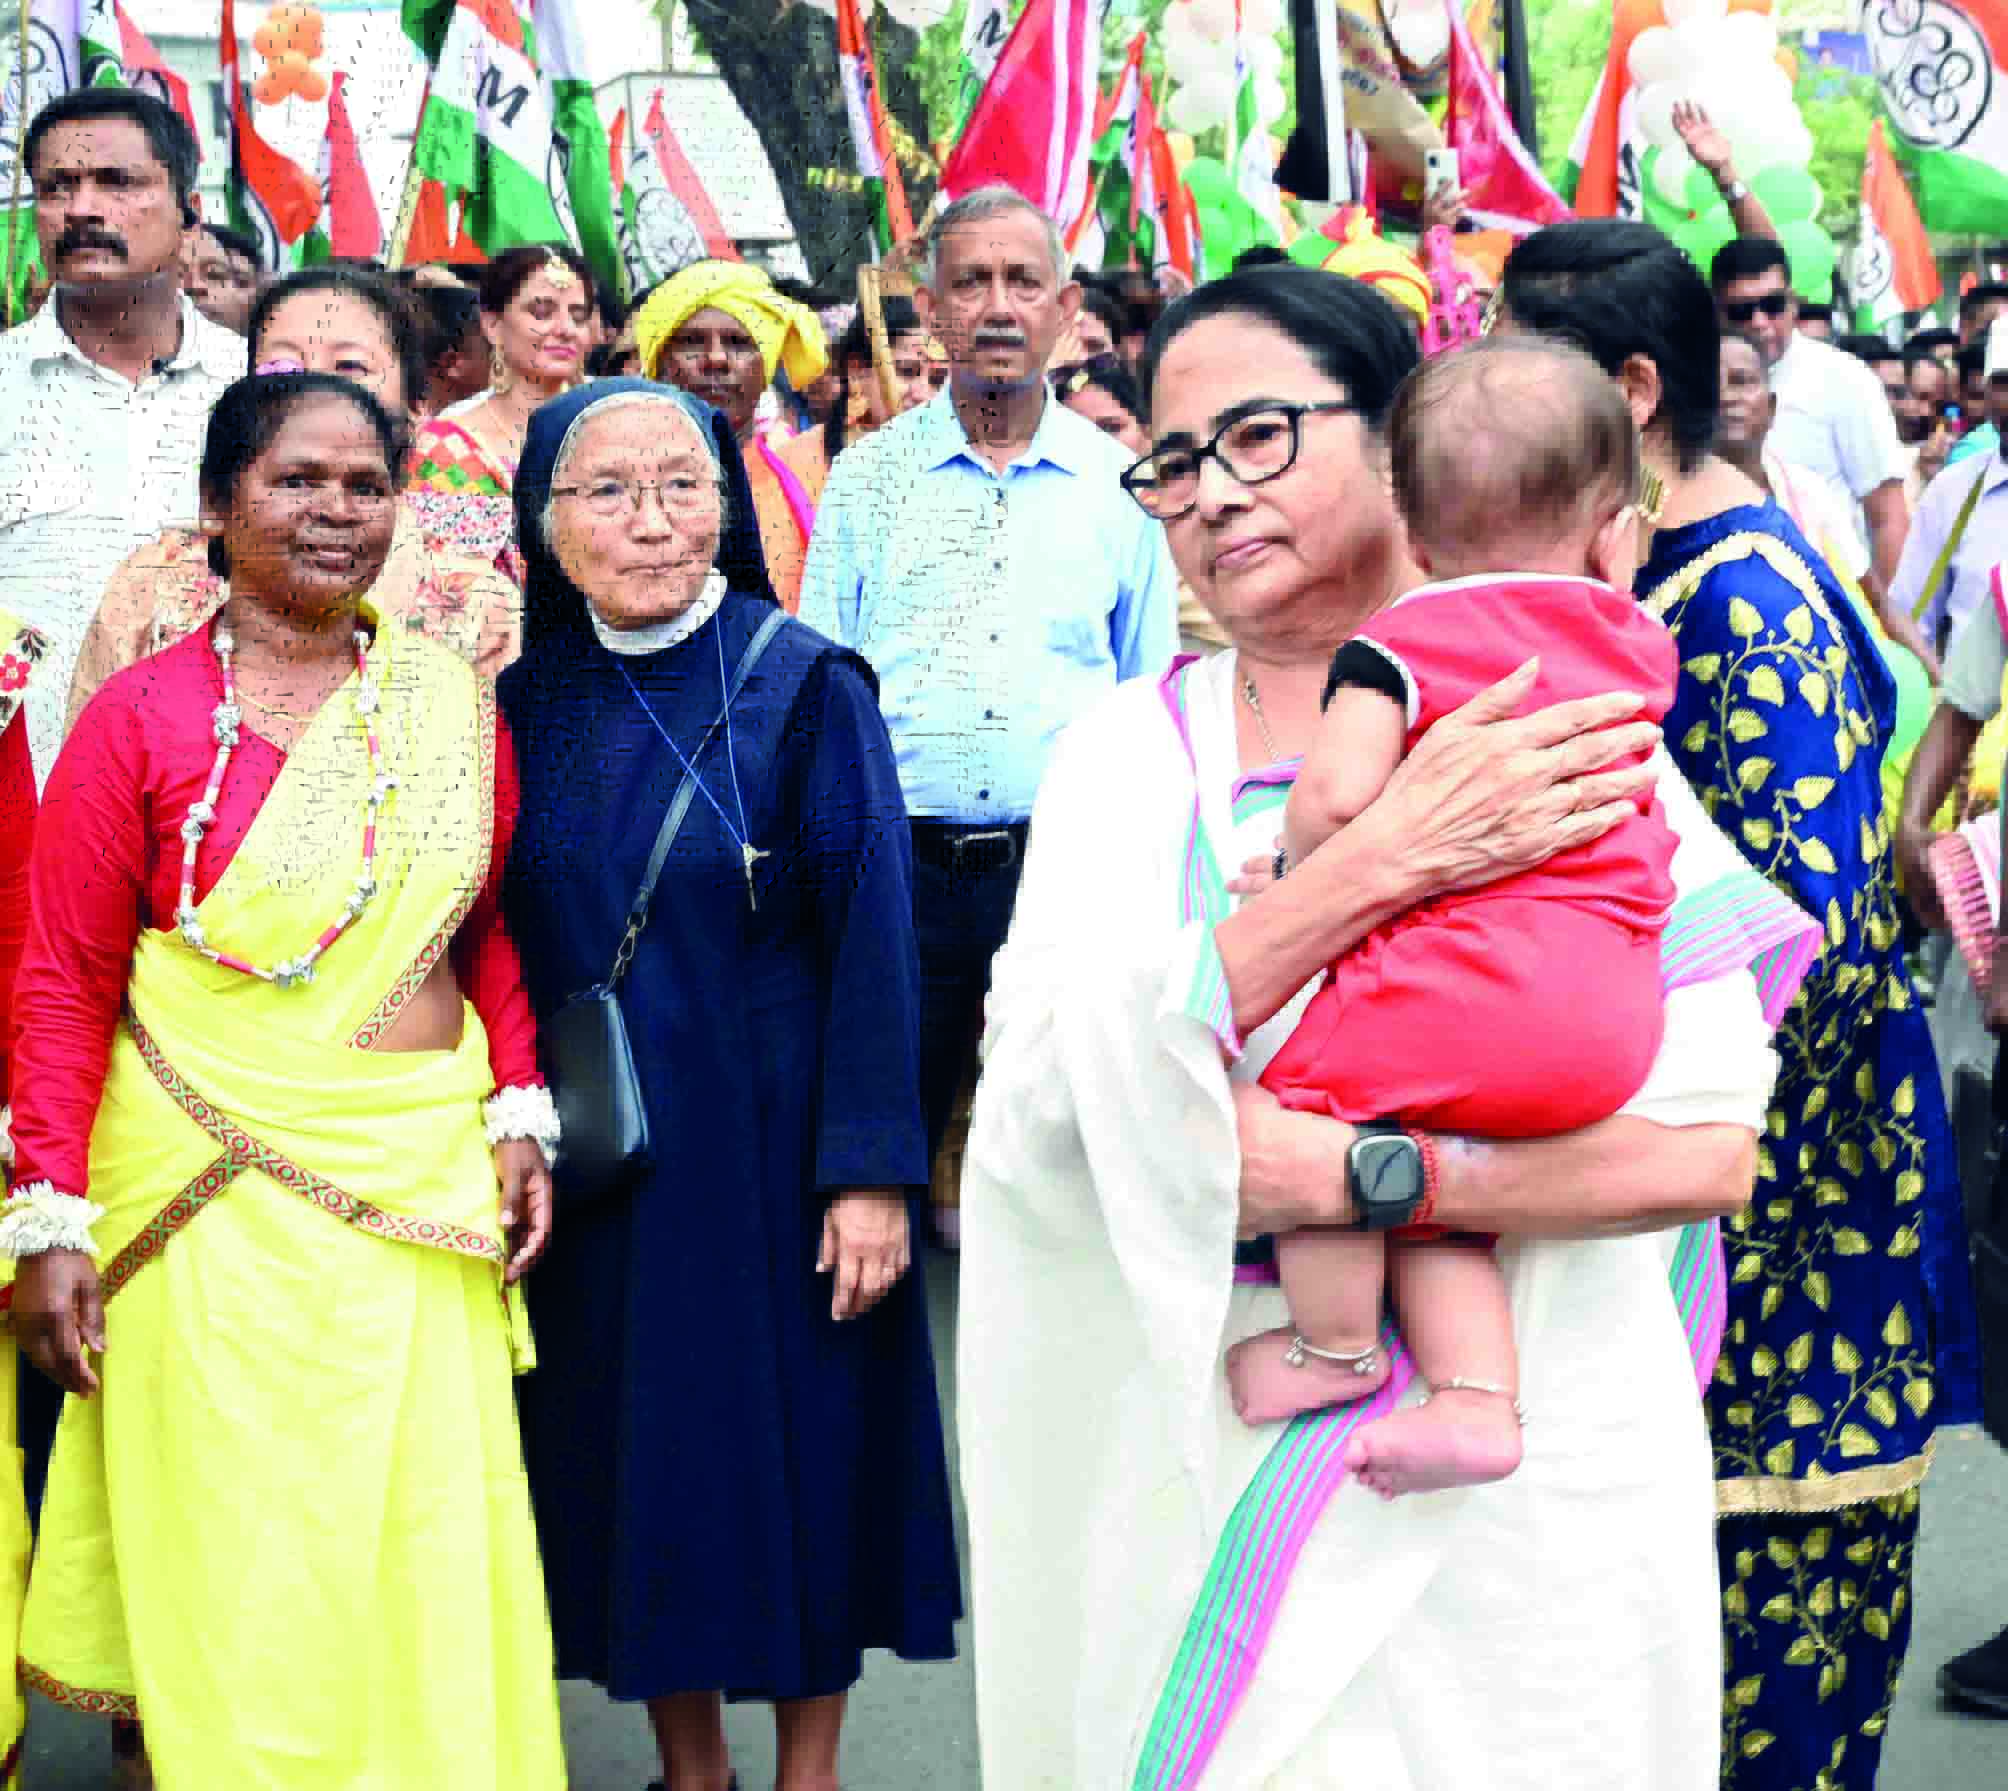 Mamata’s colourful rally in support of party candidate spreads ‘unity in diversity’ message 